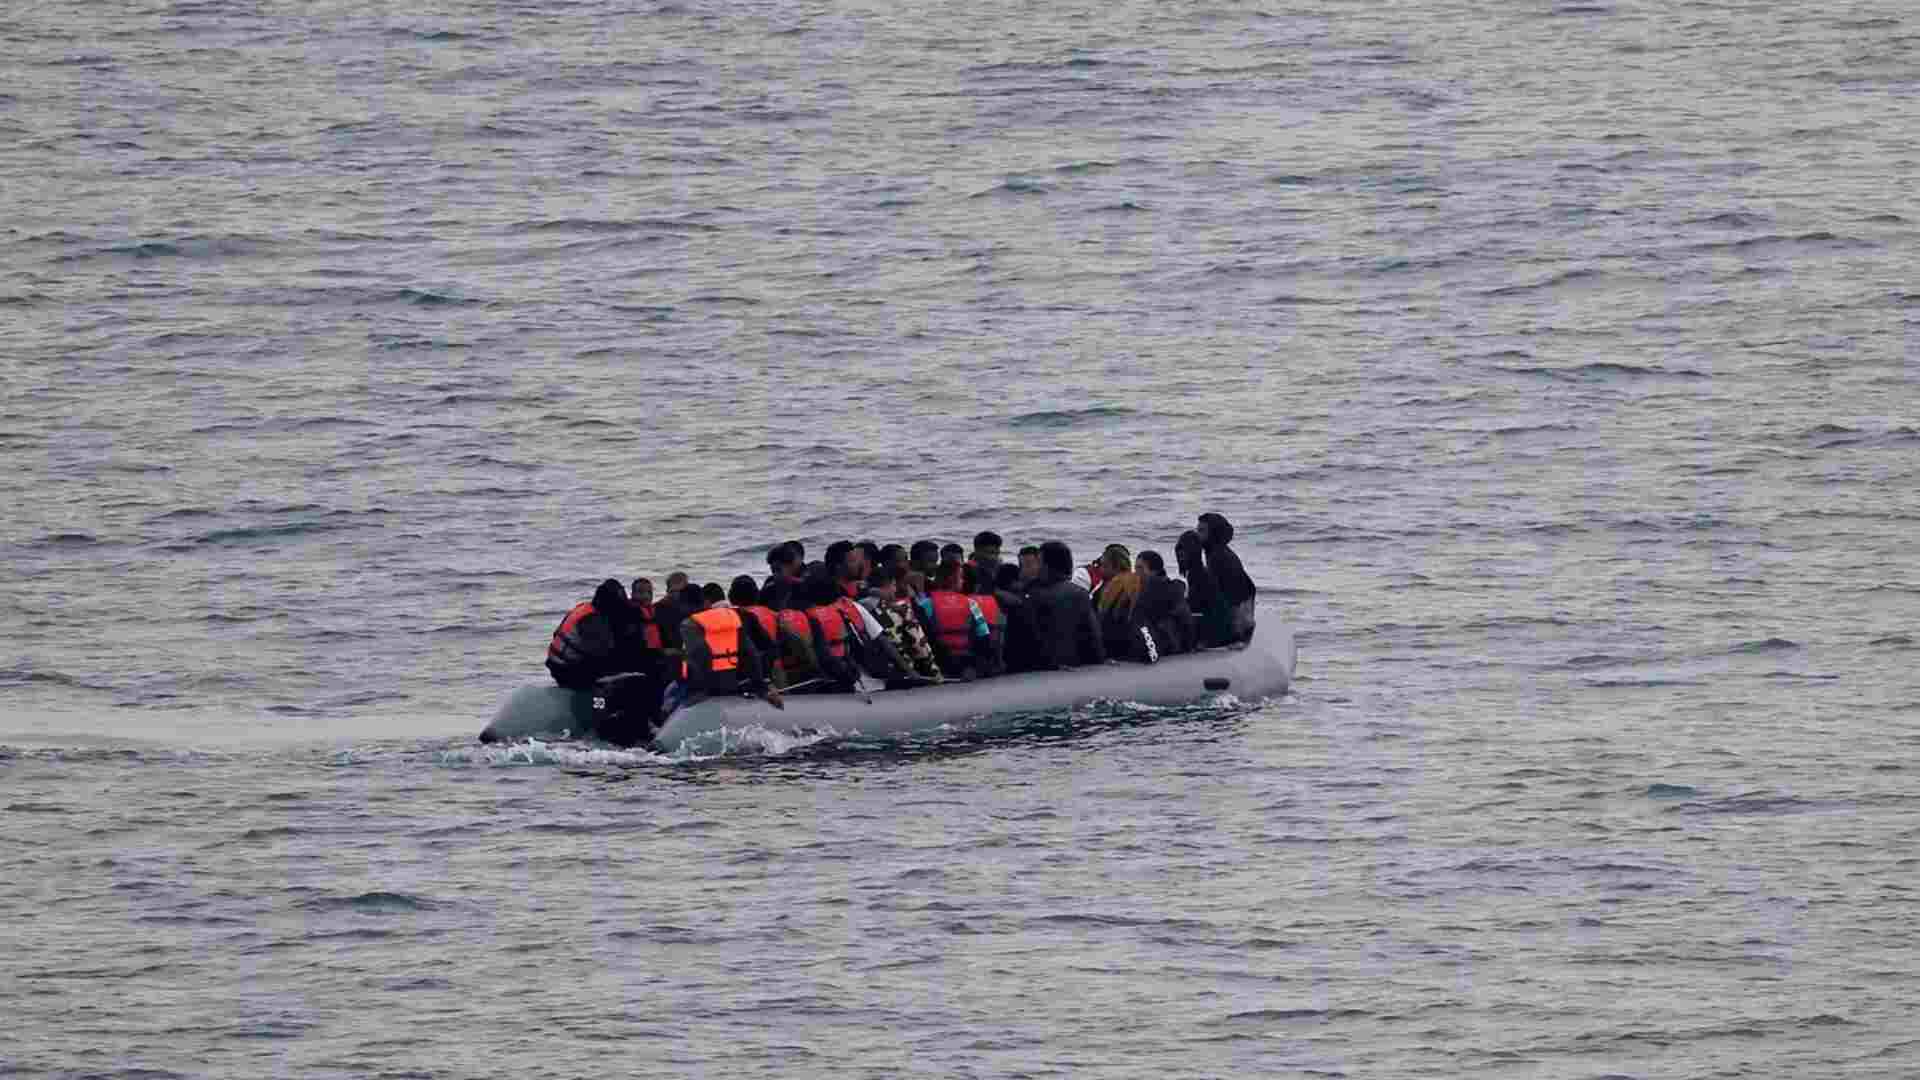 Child Among 5 Migrants Dead Trying To Cross English Channel To UK